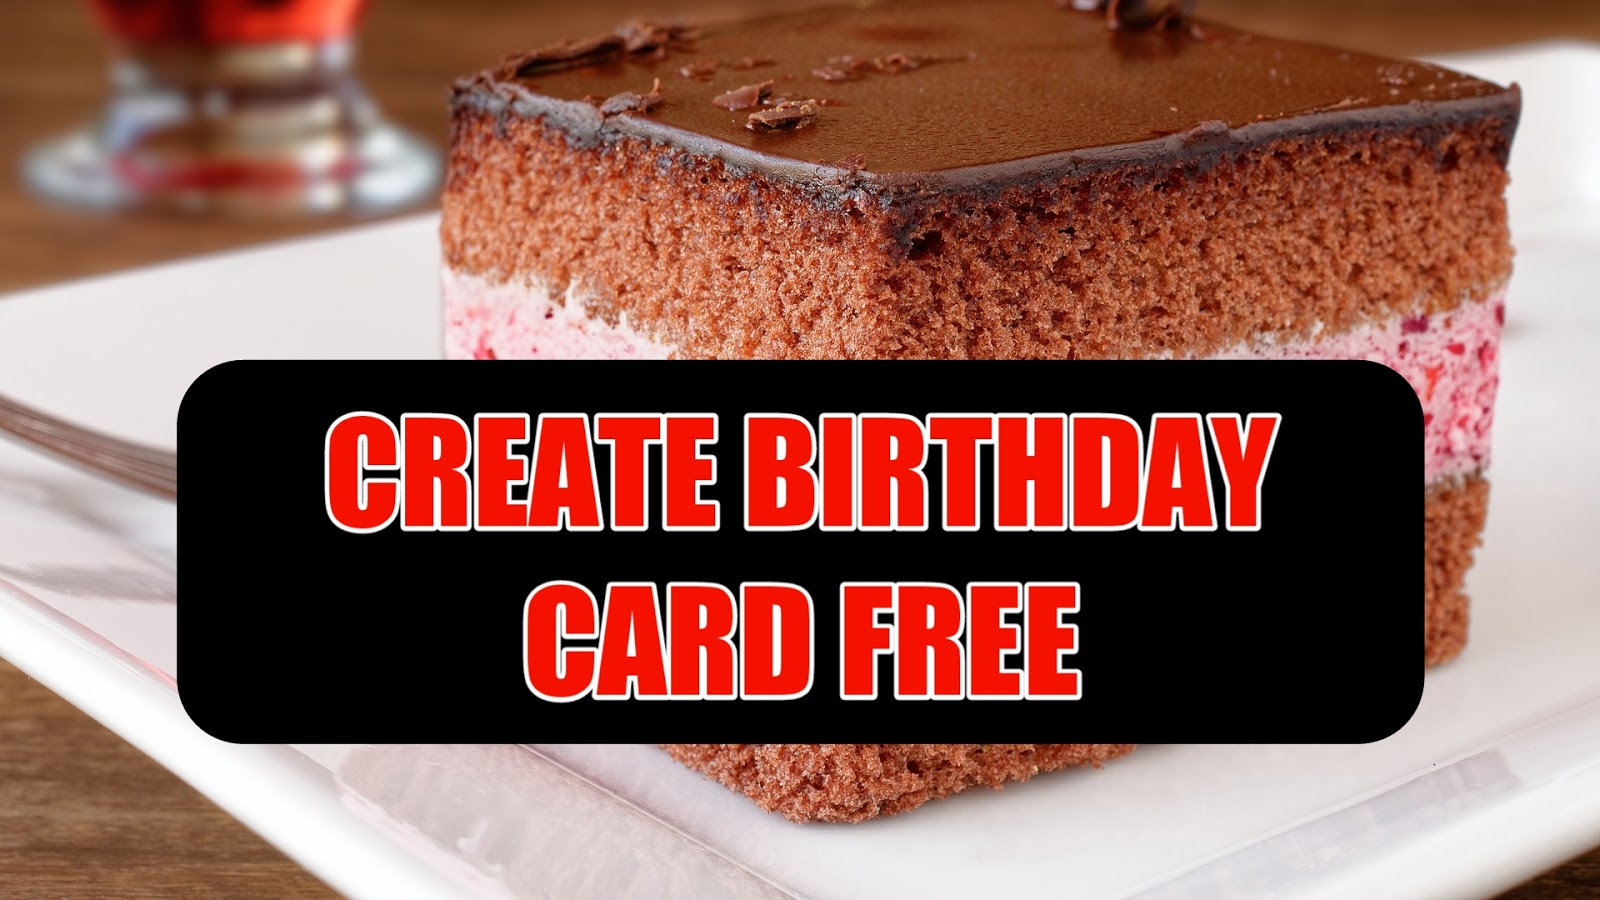 Happy Birthday Name And Photo Editor Birthday Pictures - Chocolate Cake - HD Wallpaper 